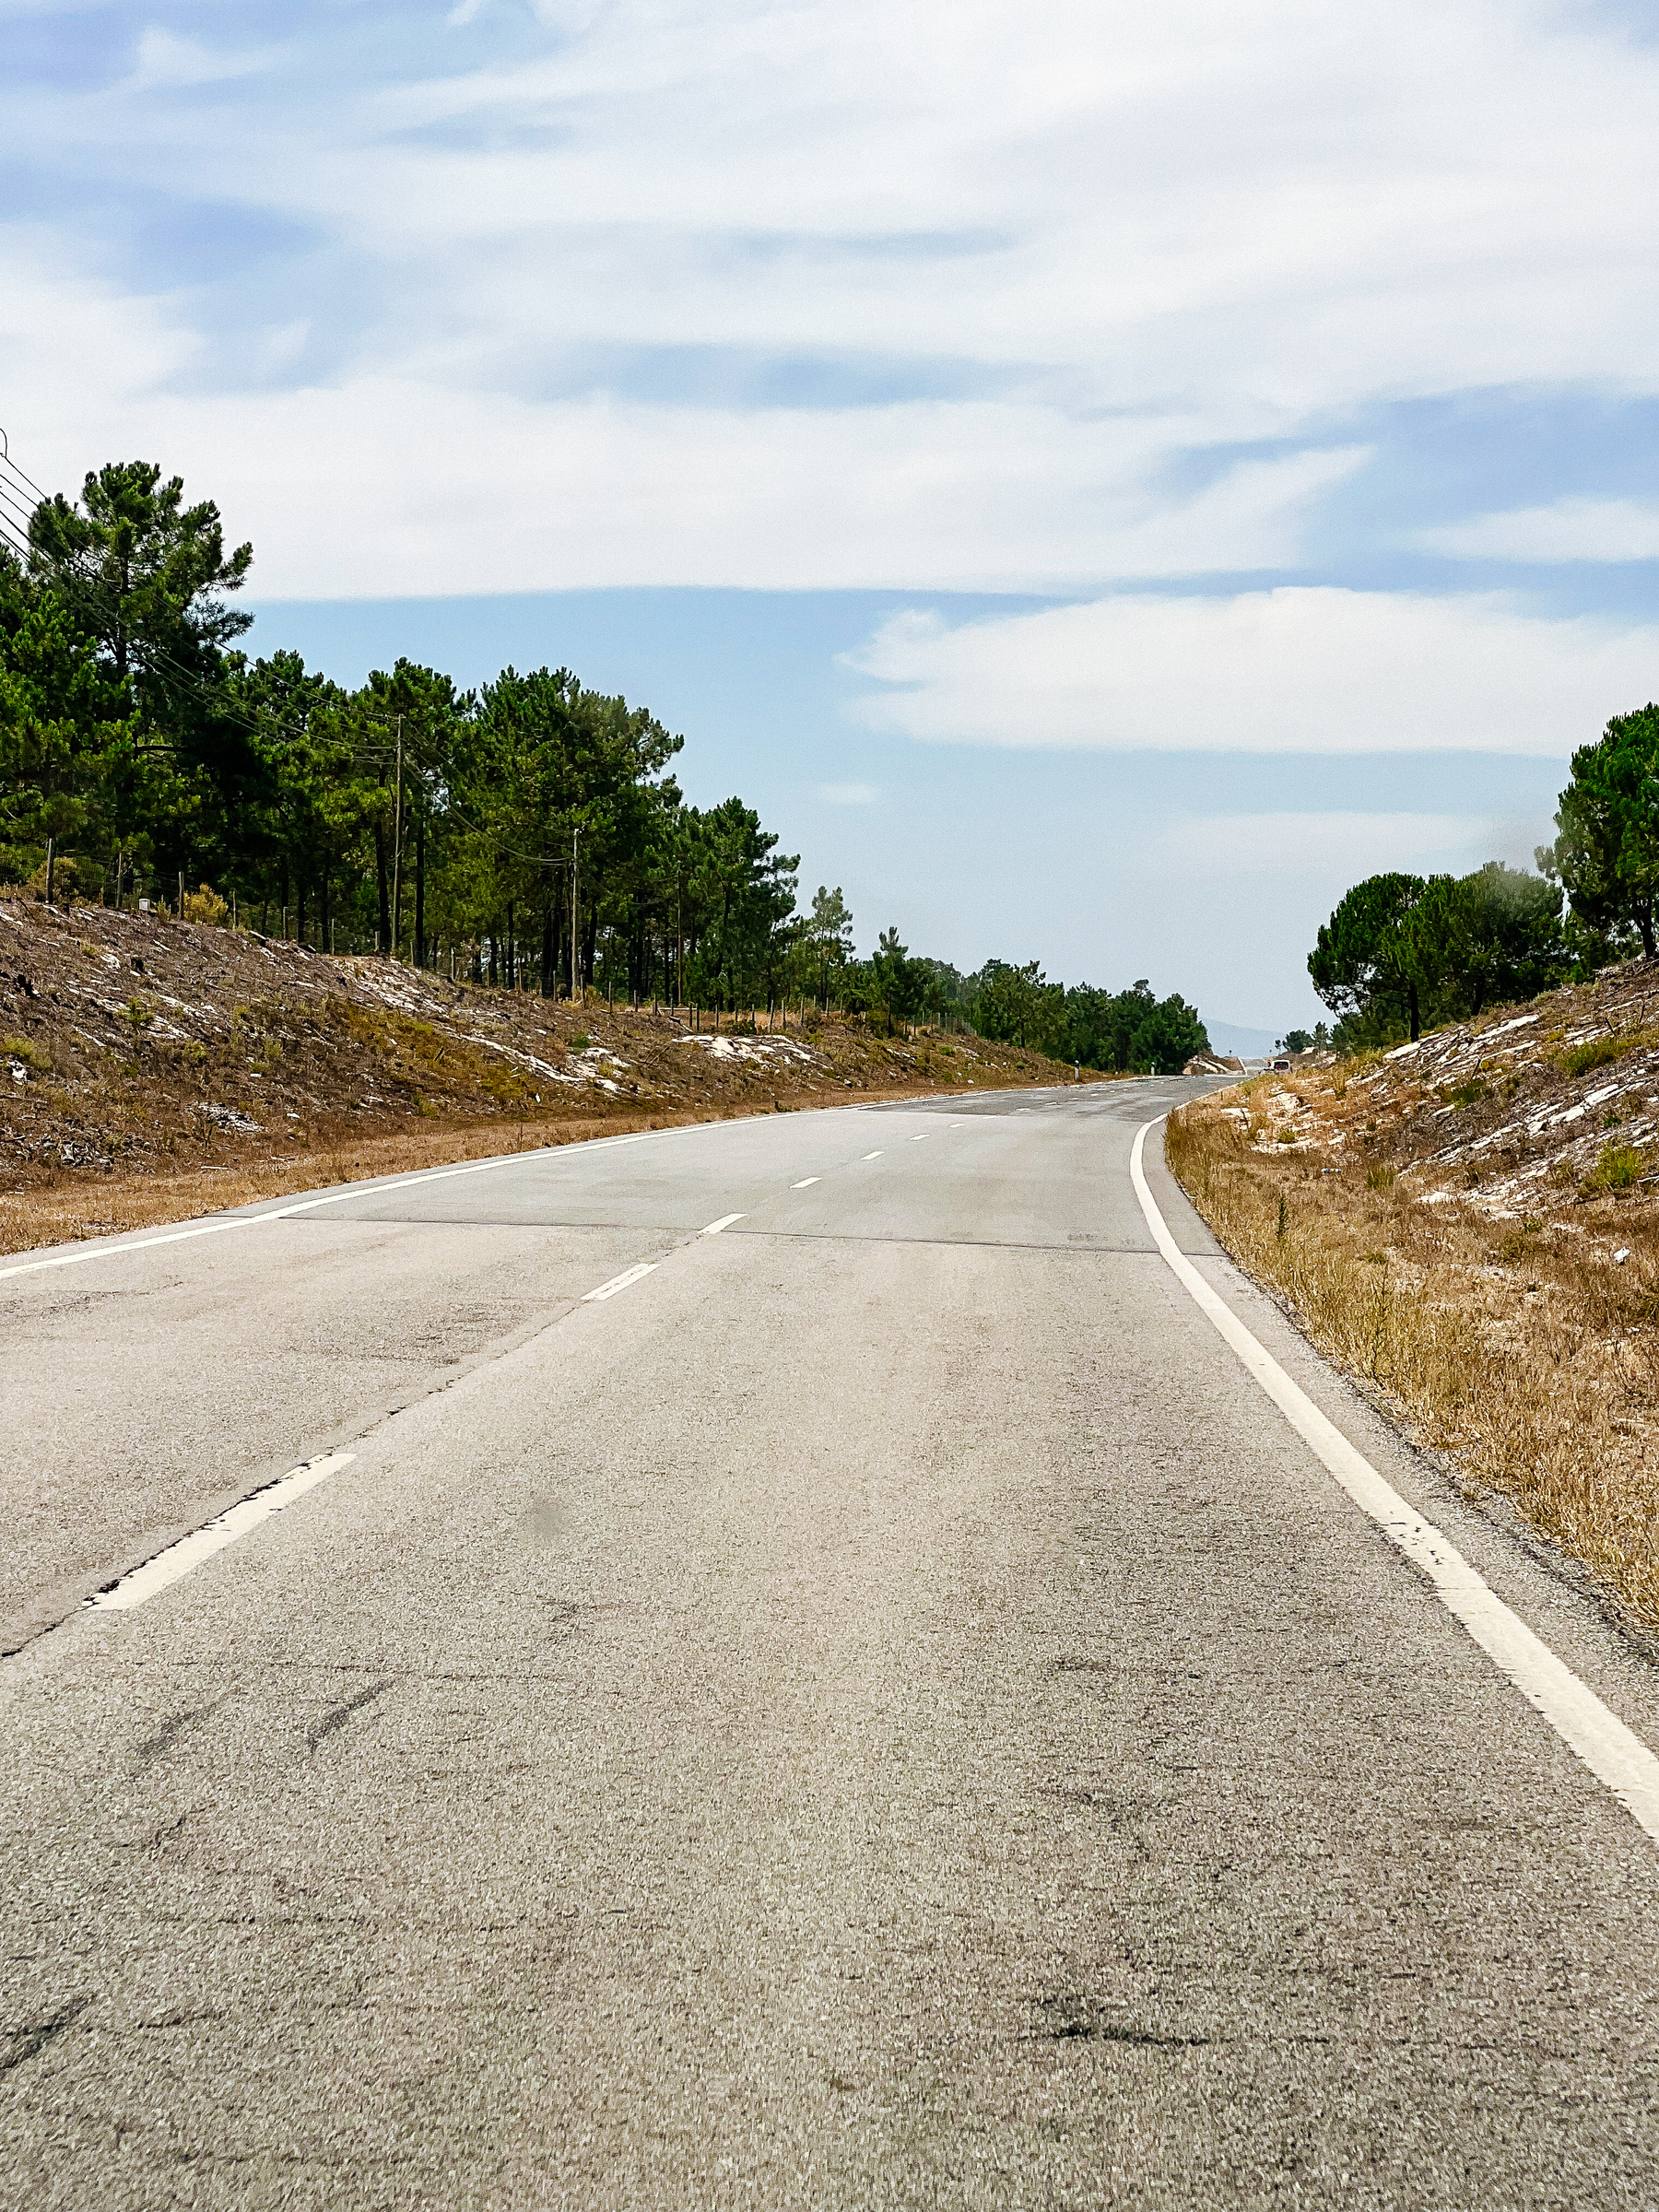 An empty country road, with pines on both sides. The sky is blue.